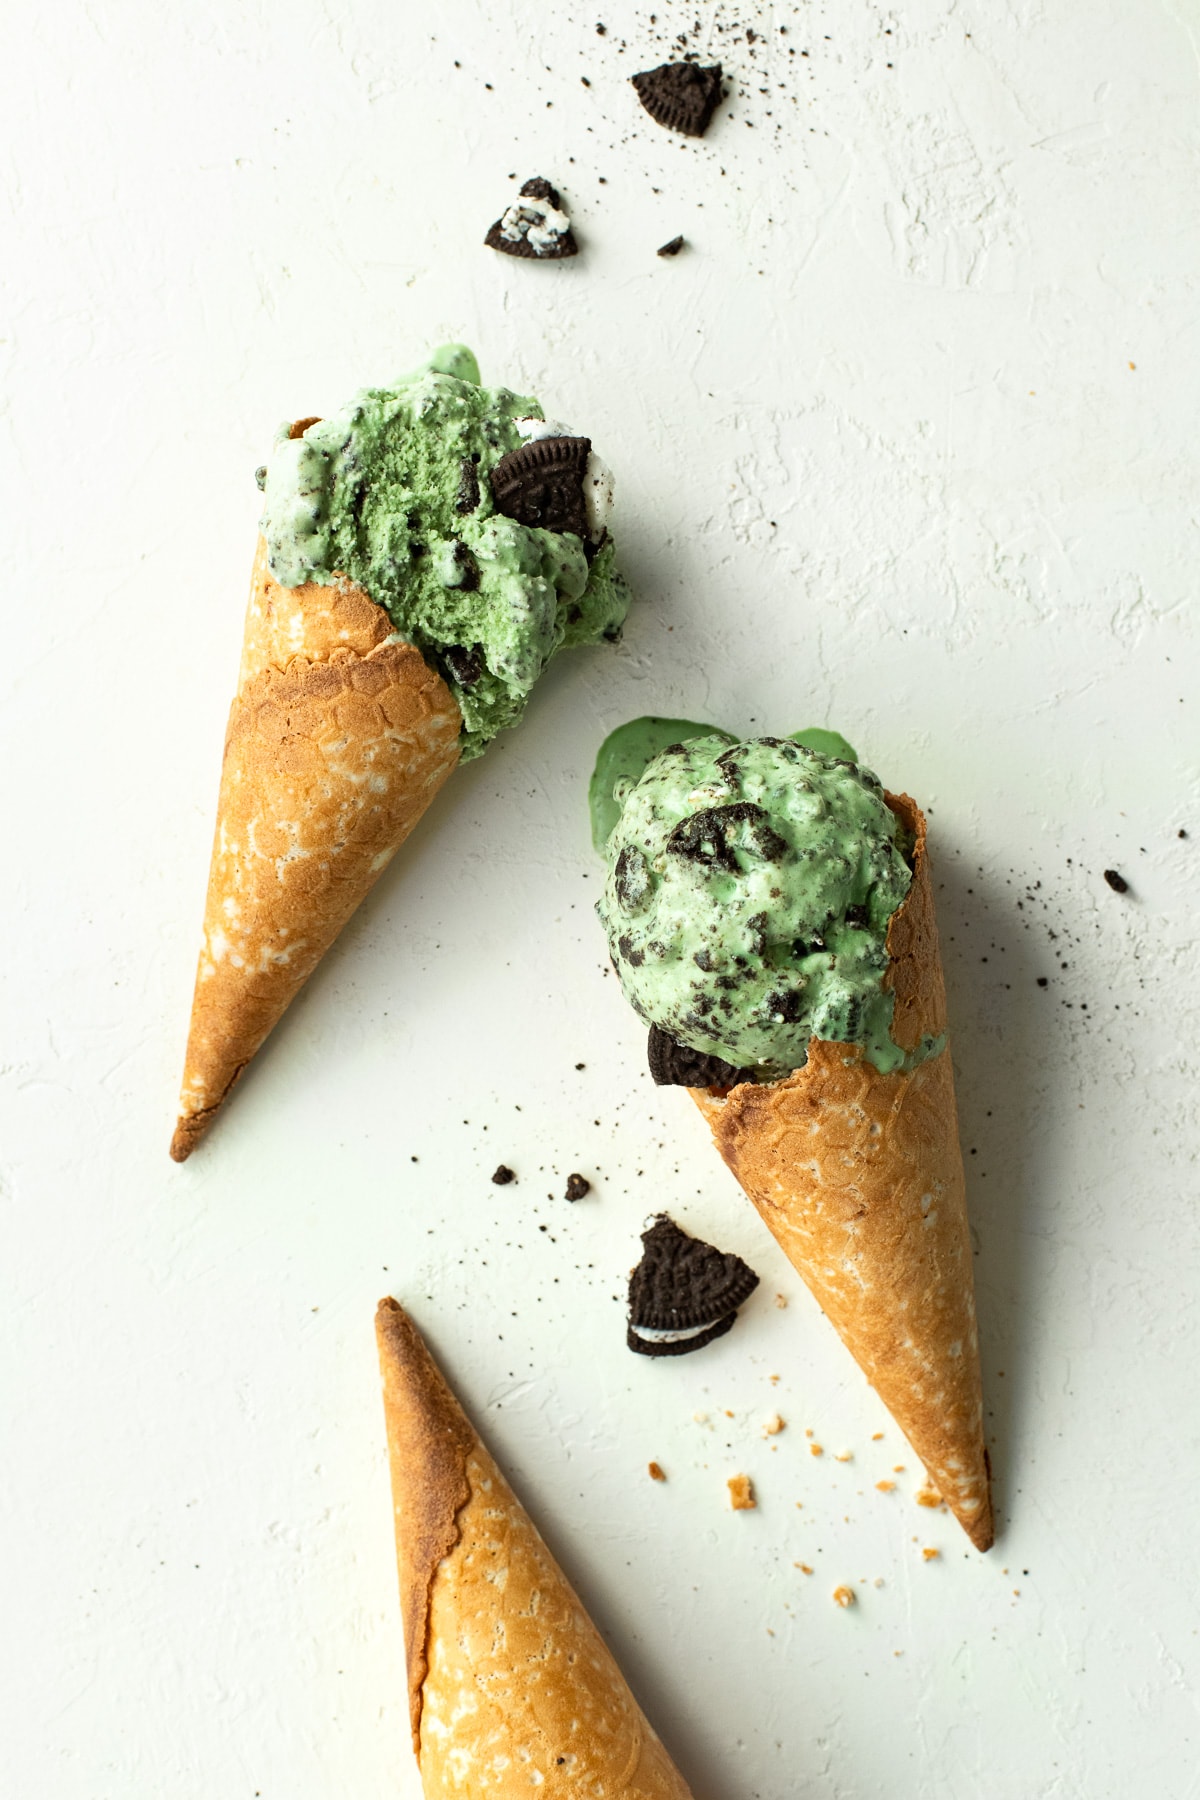 Mint ice cream in cones with Oreo cookie crumbs.